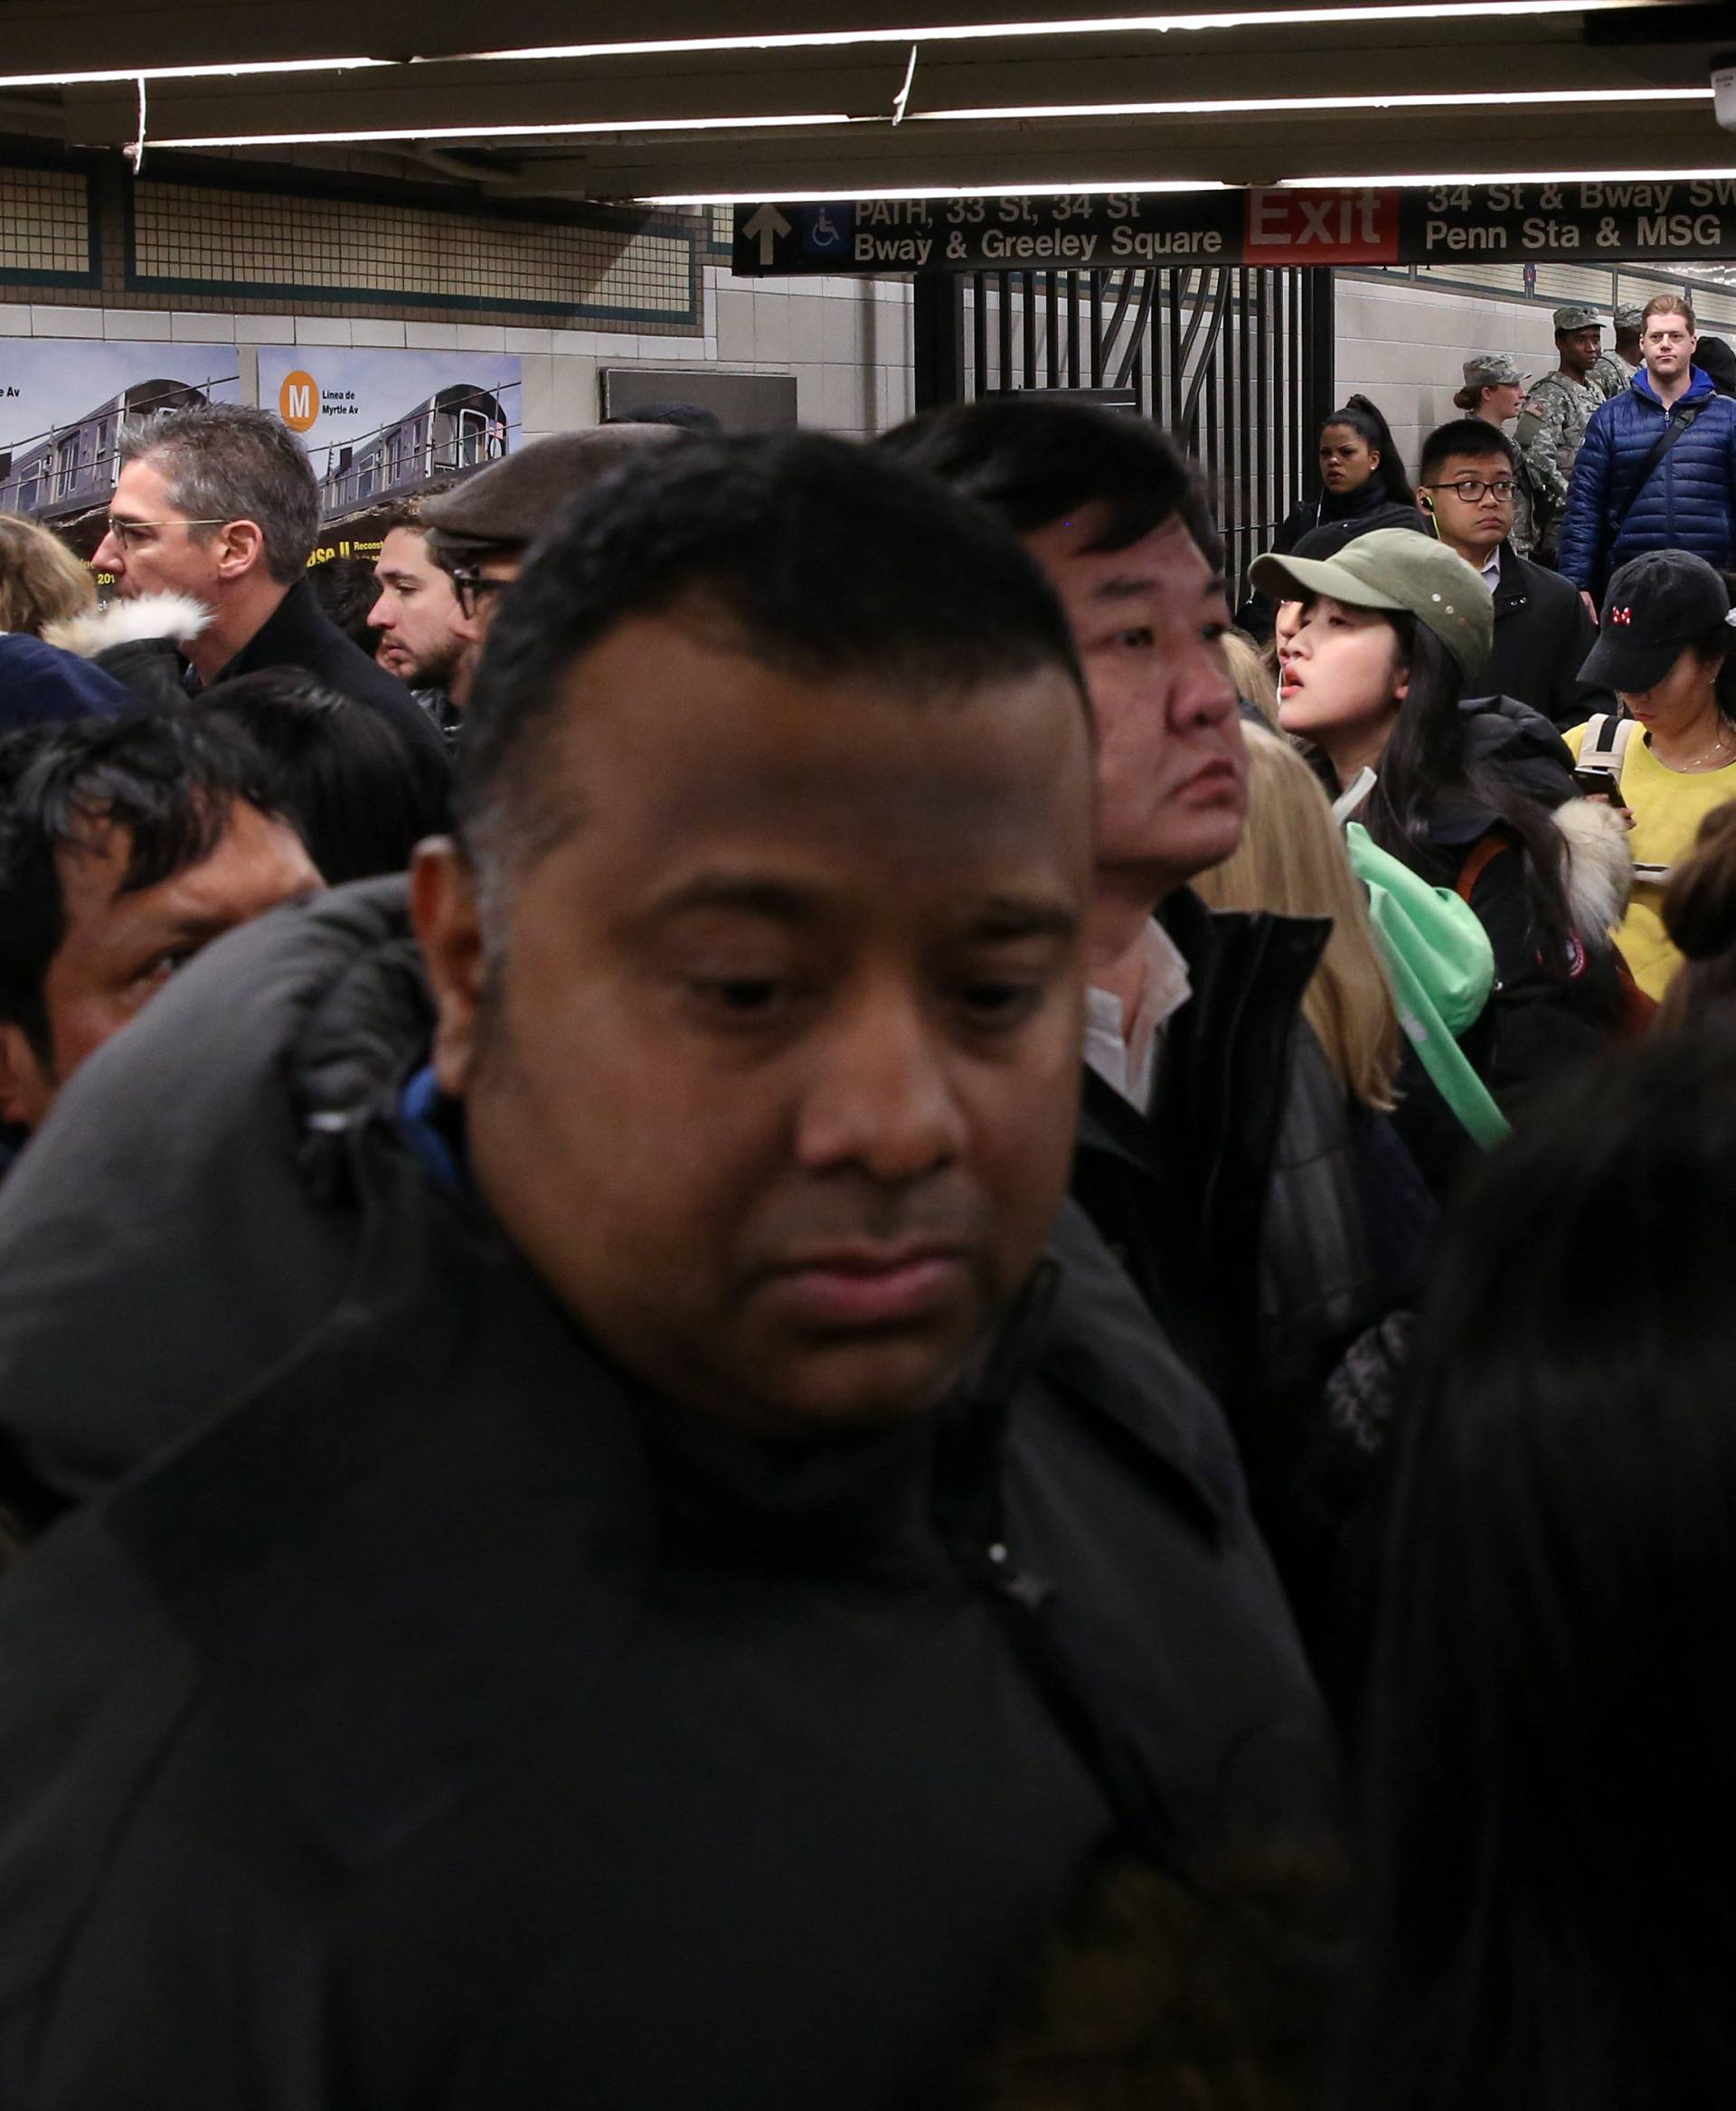 A crowd of New York City subway commuters gather at 34th St - Herald Square station after an explosion near the Port Authority Bus Terminal in New York